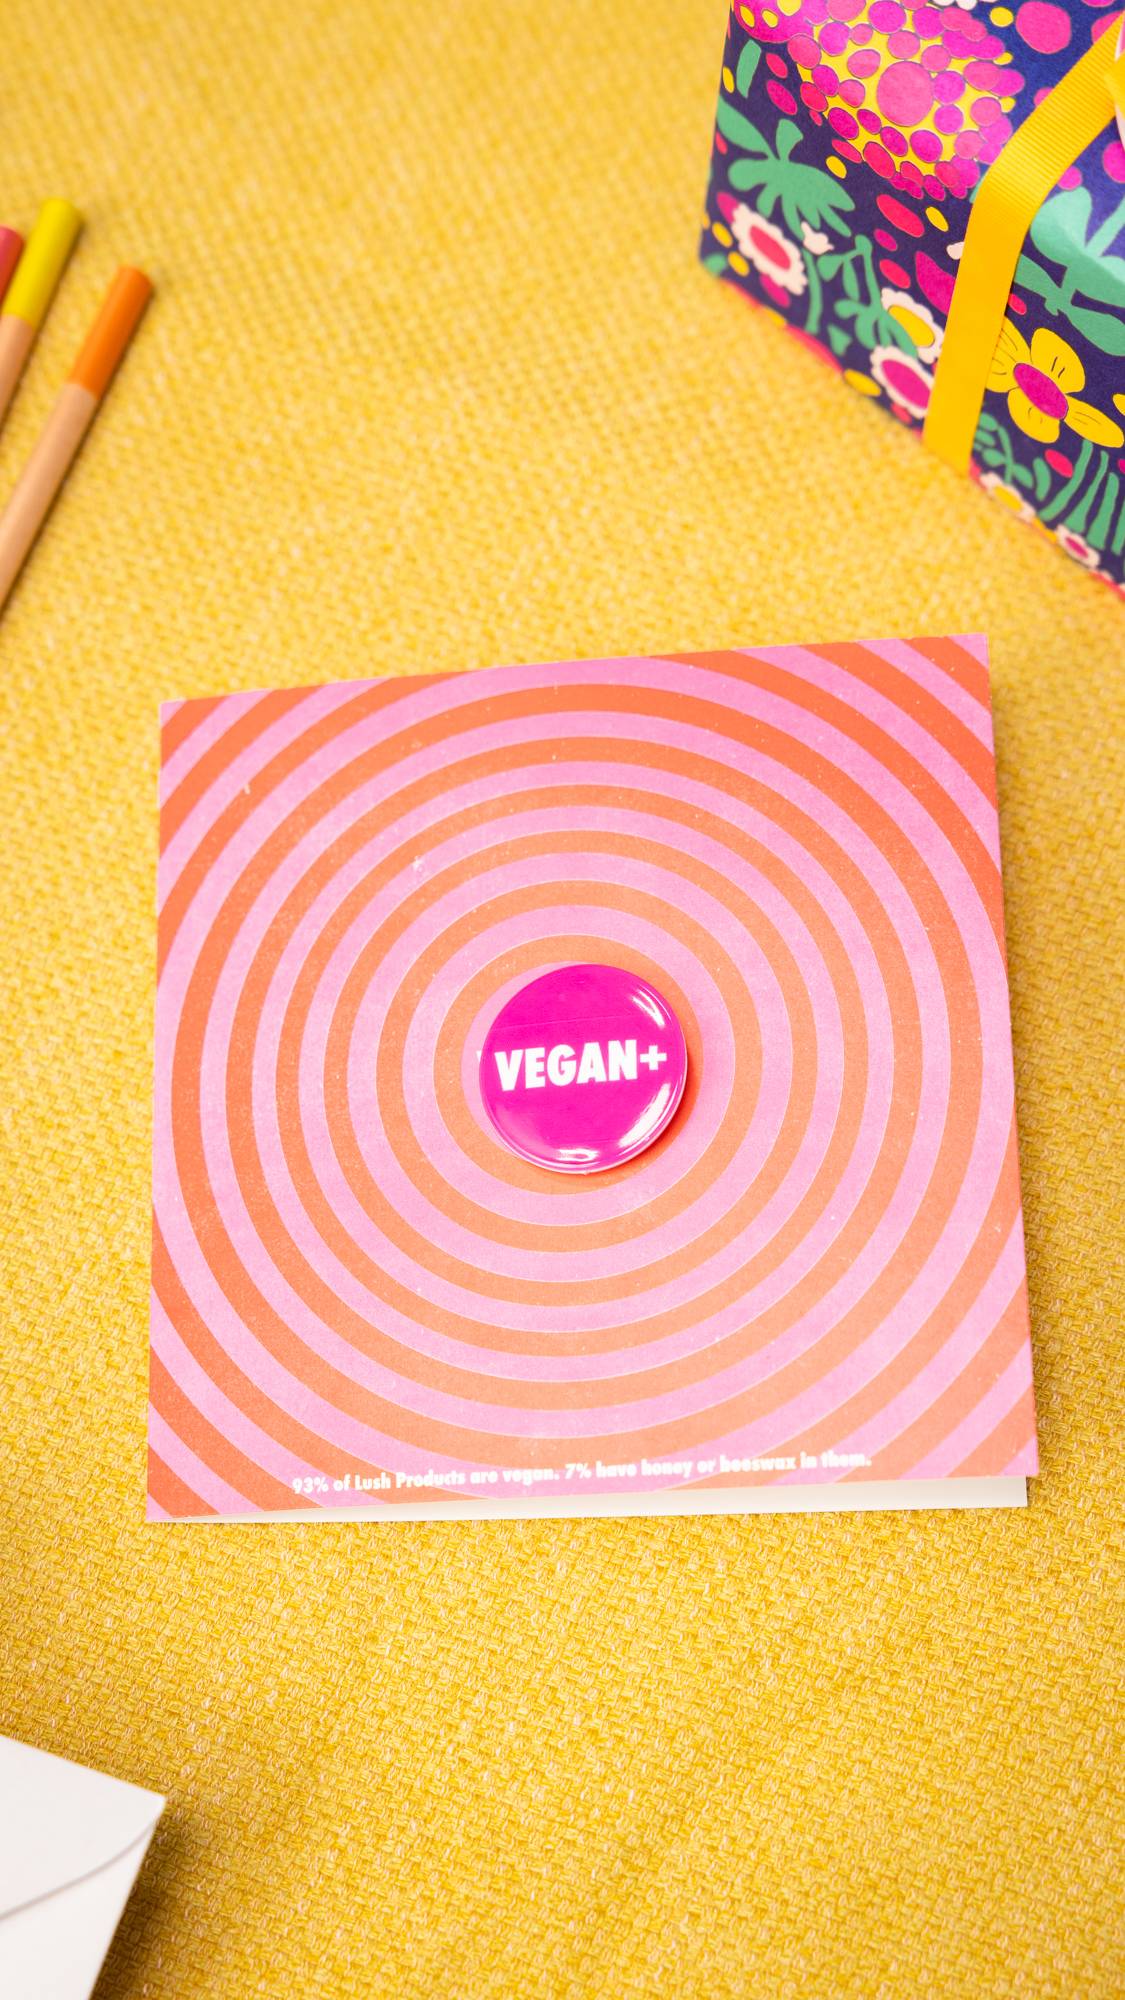 Image shows the Vegan + greetings card on a yellow cloth - the pink badge sits prominently in the centre of the card.